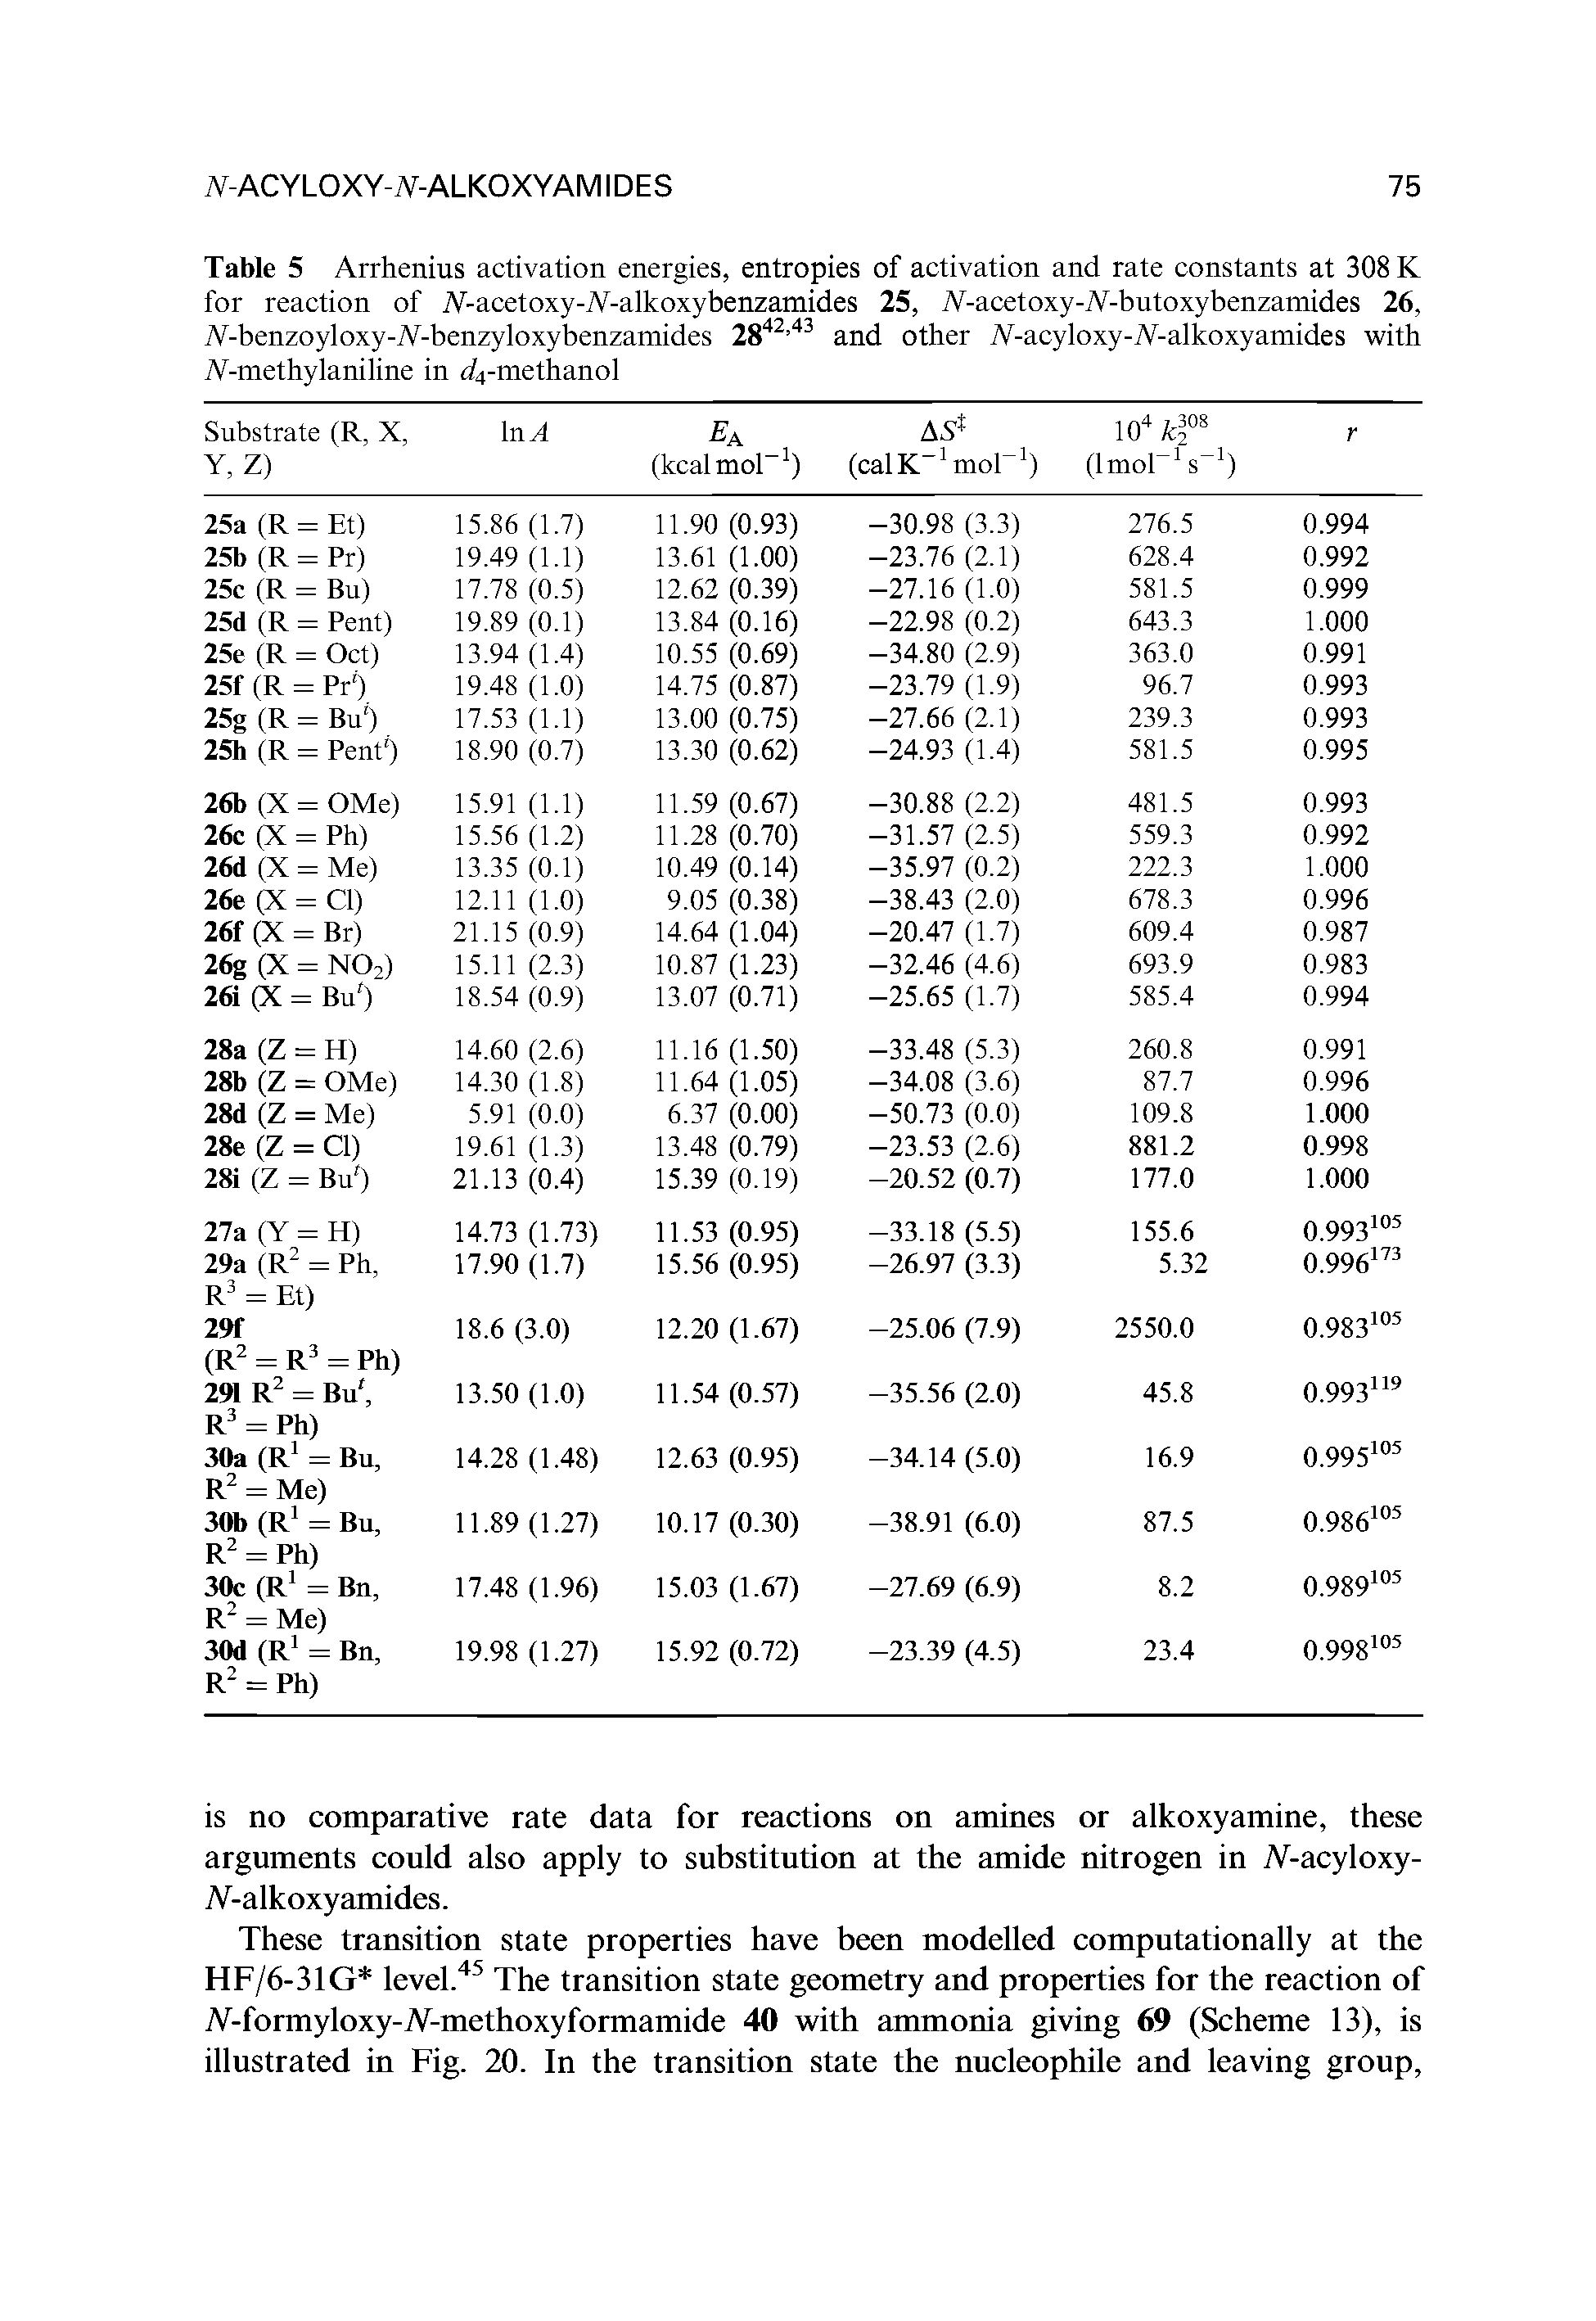 Table 5 Arrhenius activation energies, entropies of activation and rate constants at 308 K for reaction of A-acetoxy-A-alkoxybenzamides 25, iV-acetoxy-iV-butoxybenzamides 26, iV-benzoyloxy-iV-benzyloxybenzamides 2842,43 and other iV-acyloxy-iV-alkoxyamides with A-methylaniline in d4-methanol...